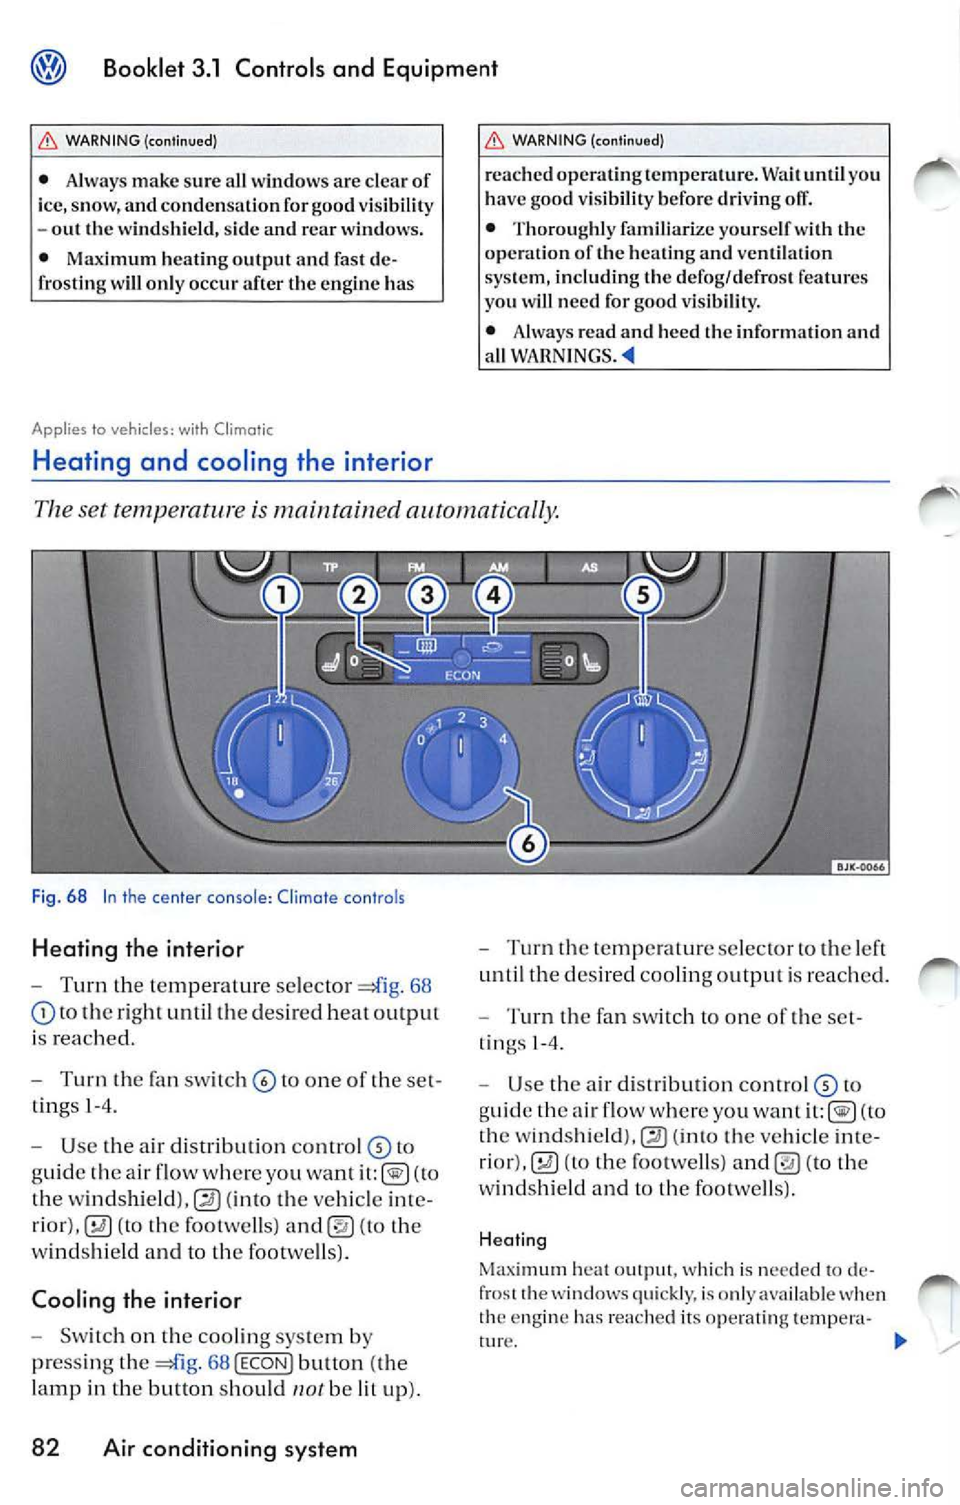 VOLKSWAGEN JETTA 2008  Owners Manual Booklet  3.1  Controls  and  Equipment 
WARNING  (continued) 
• Always  make  sure  a ll windows  arc  clear  of 
ice,  snow,  and  conde nsa tion  for  good  v is ibili ty 
-out  the wind shi eld ,